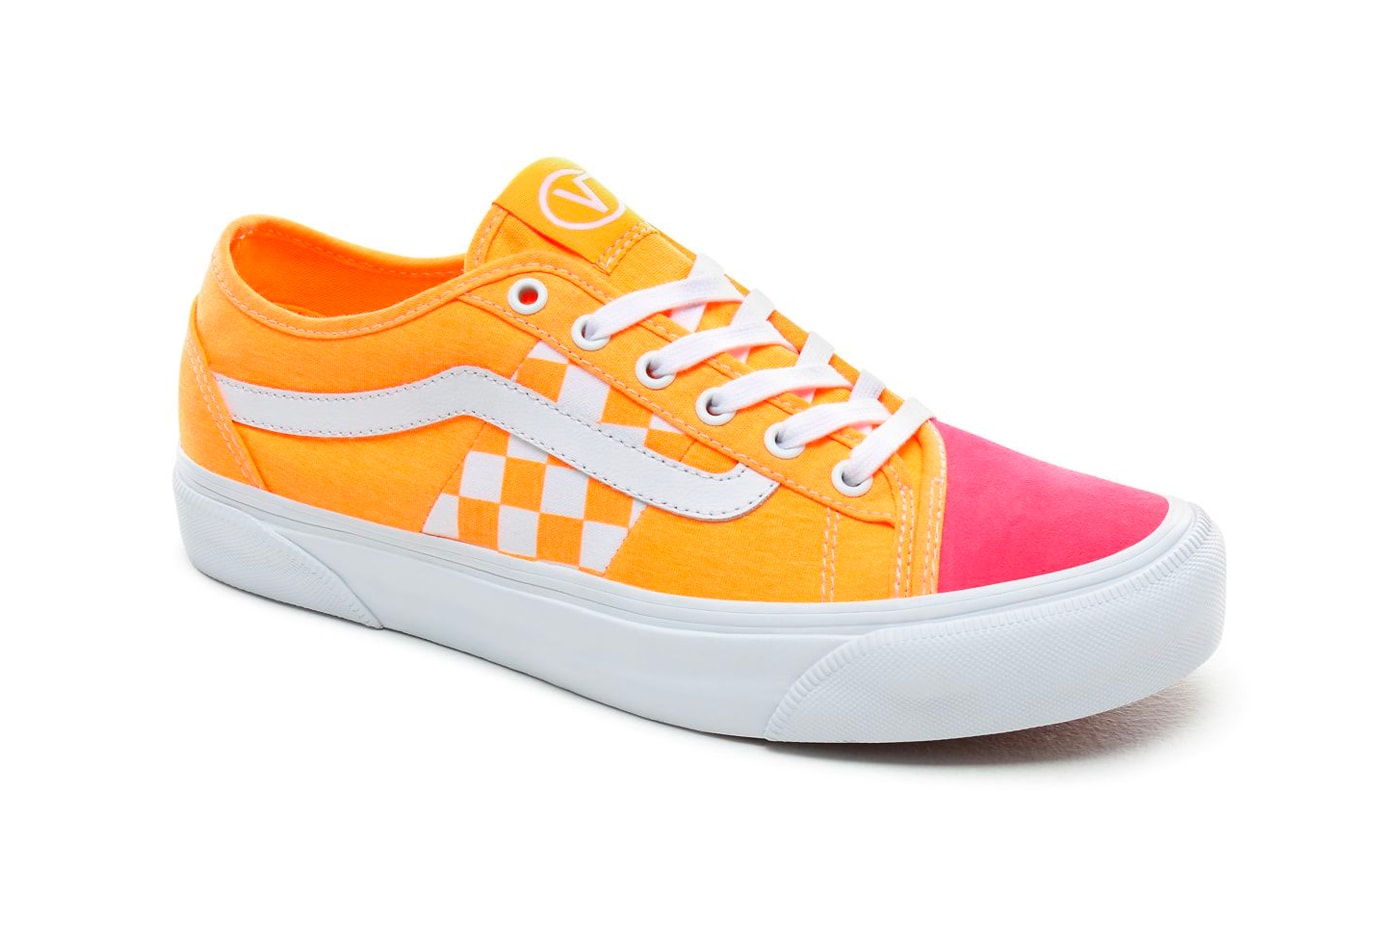 Vans BESS NI Orange Pop Knockout Pink Navy Stv Billys exclusive waffle sole white laces checkers side stripes midsole duo tone asymmetrical 